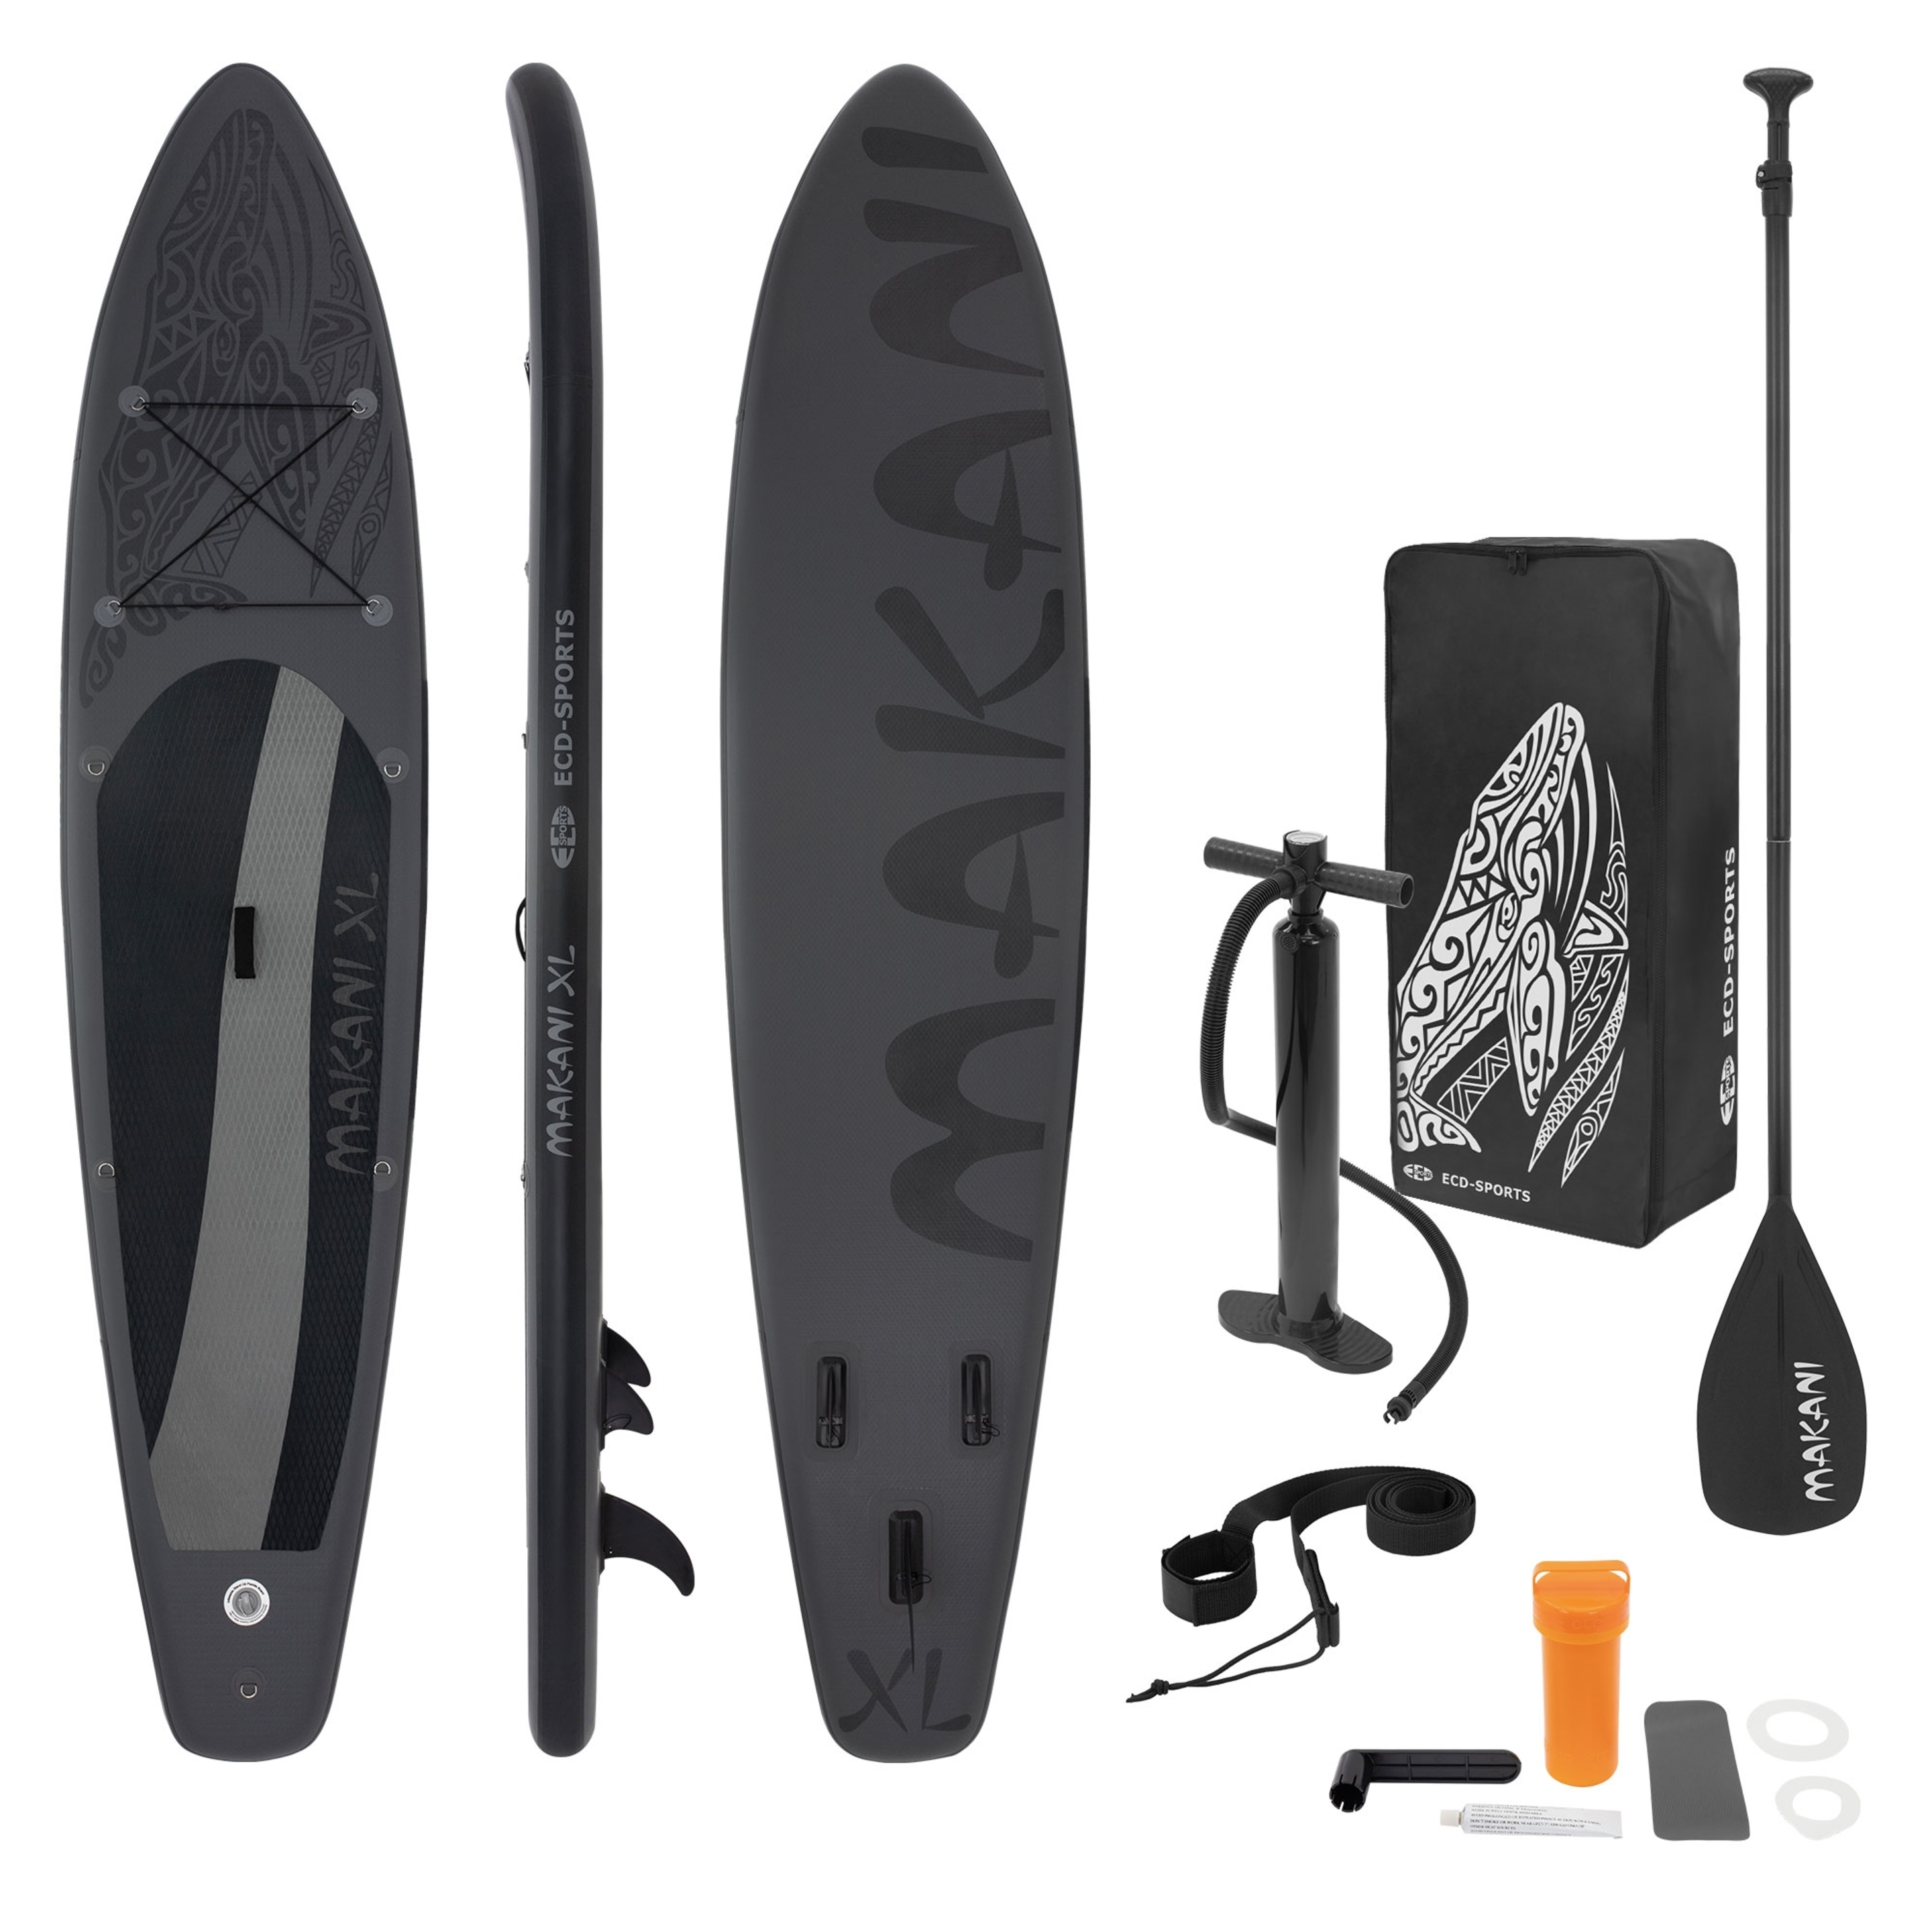 Tabla De Stand Up Paddle Inflable Makani Xl 380x80x15 Cm